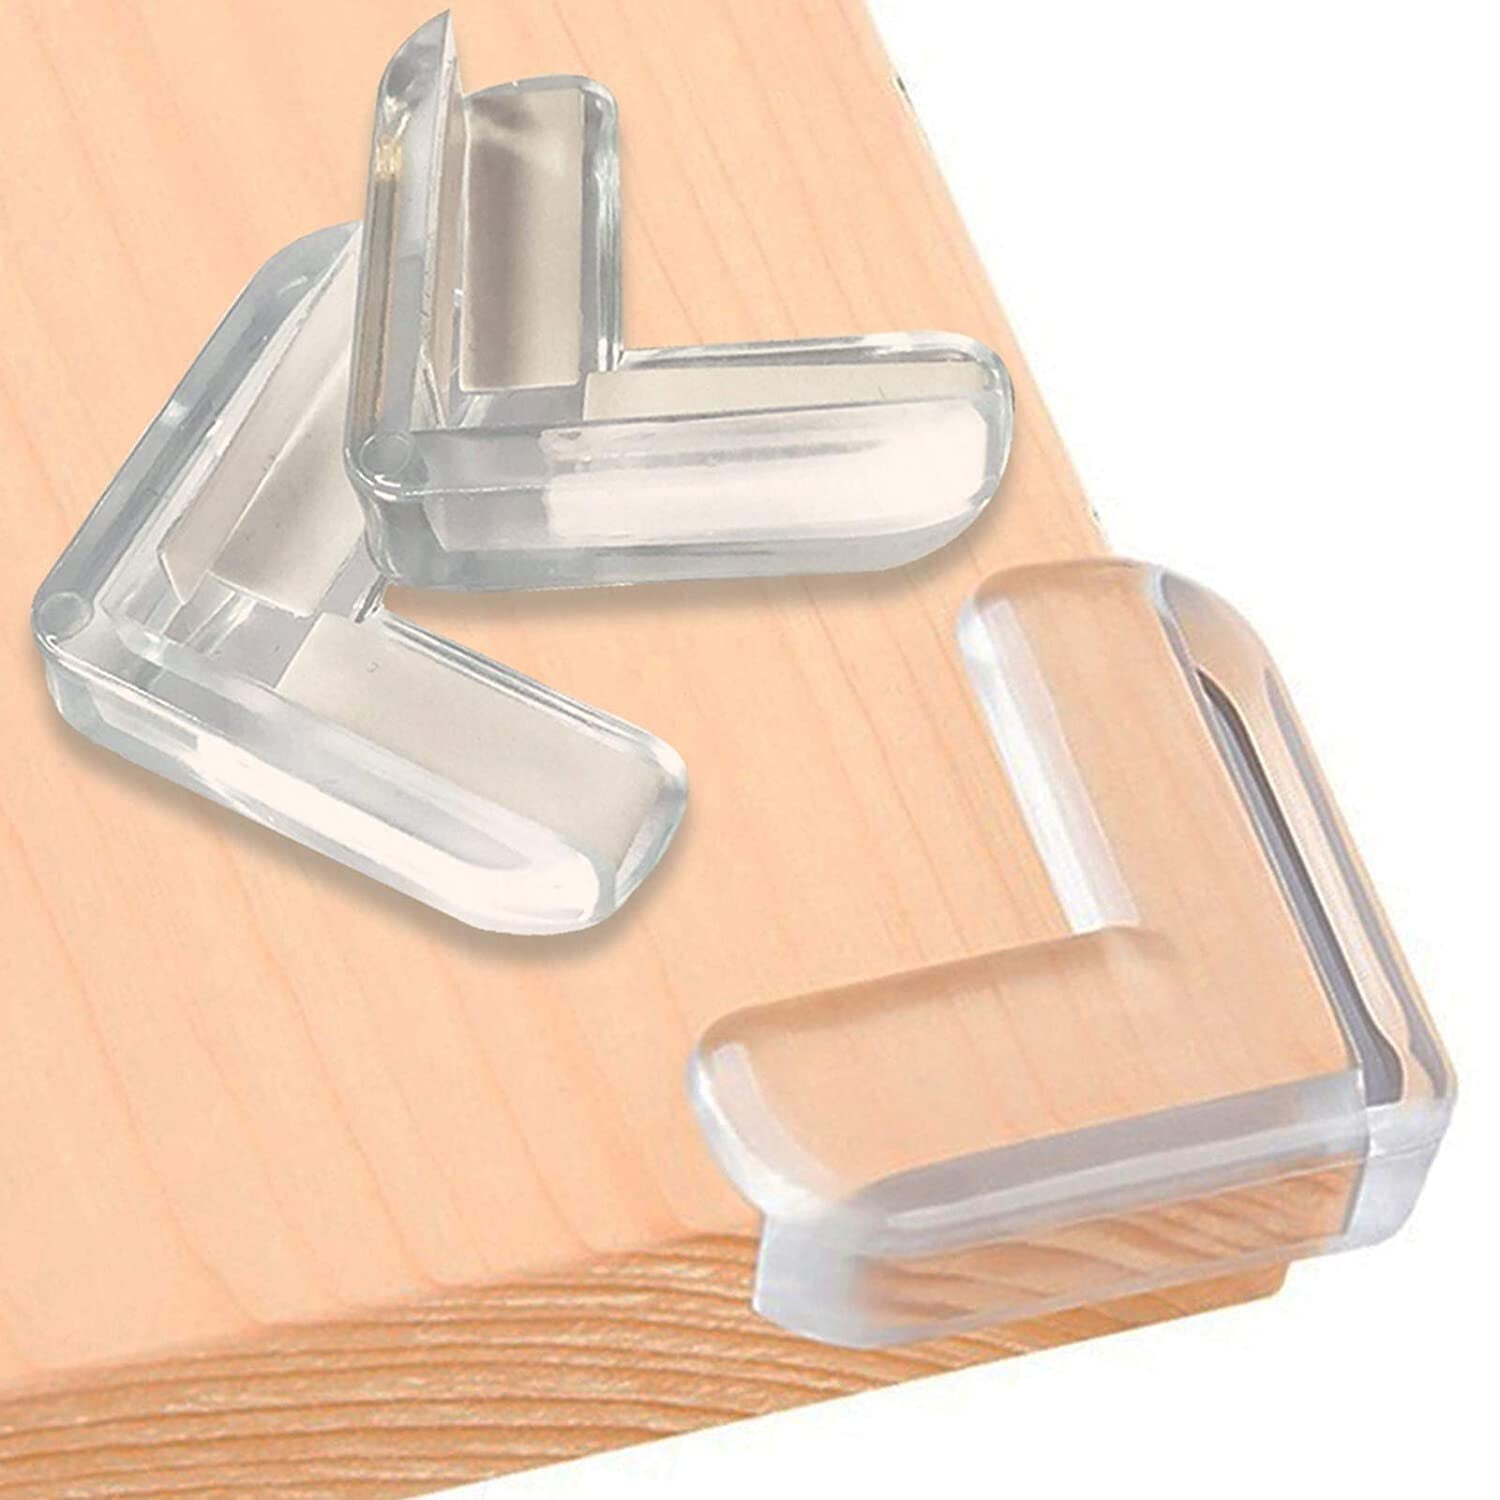 4 Pack Transparent Table Corner Guard Baby Child Kids Safety Bumpers Protectors 